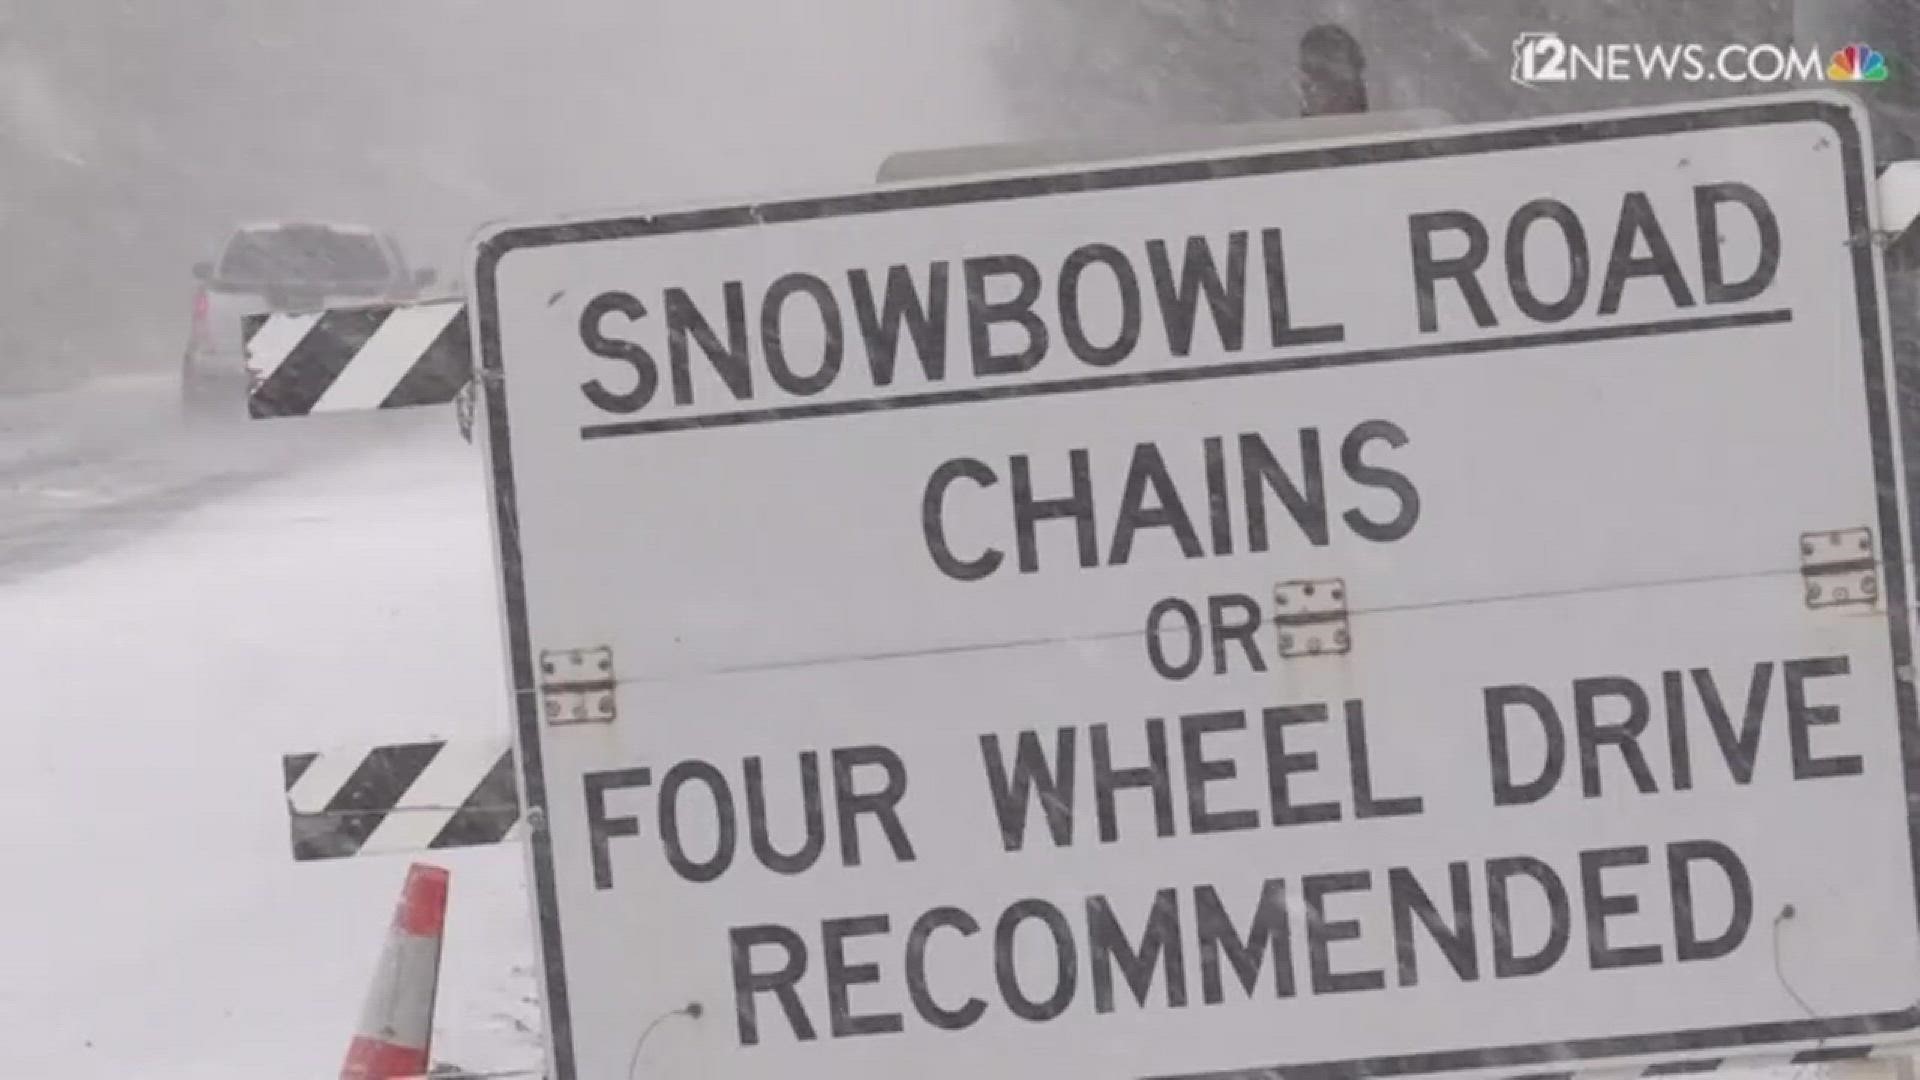 Two Northern Arizona University students were on their way to hit the slopes Friday when the winter storm turned Snowbowl Road into an icy trap.